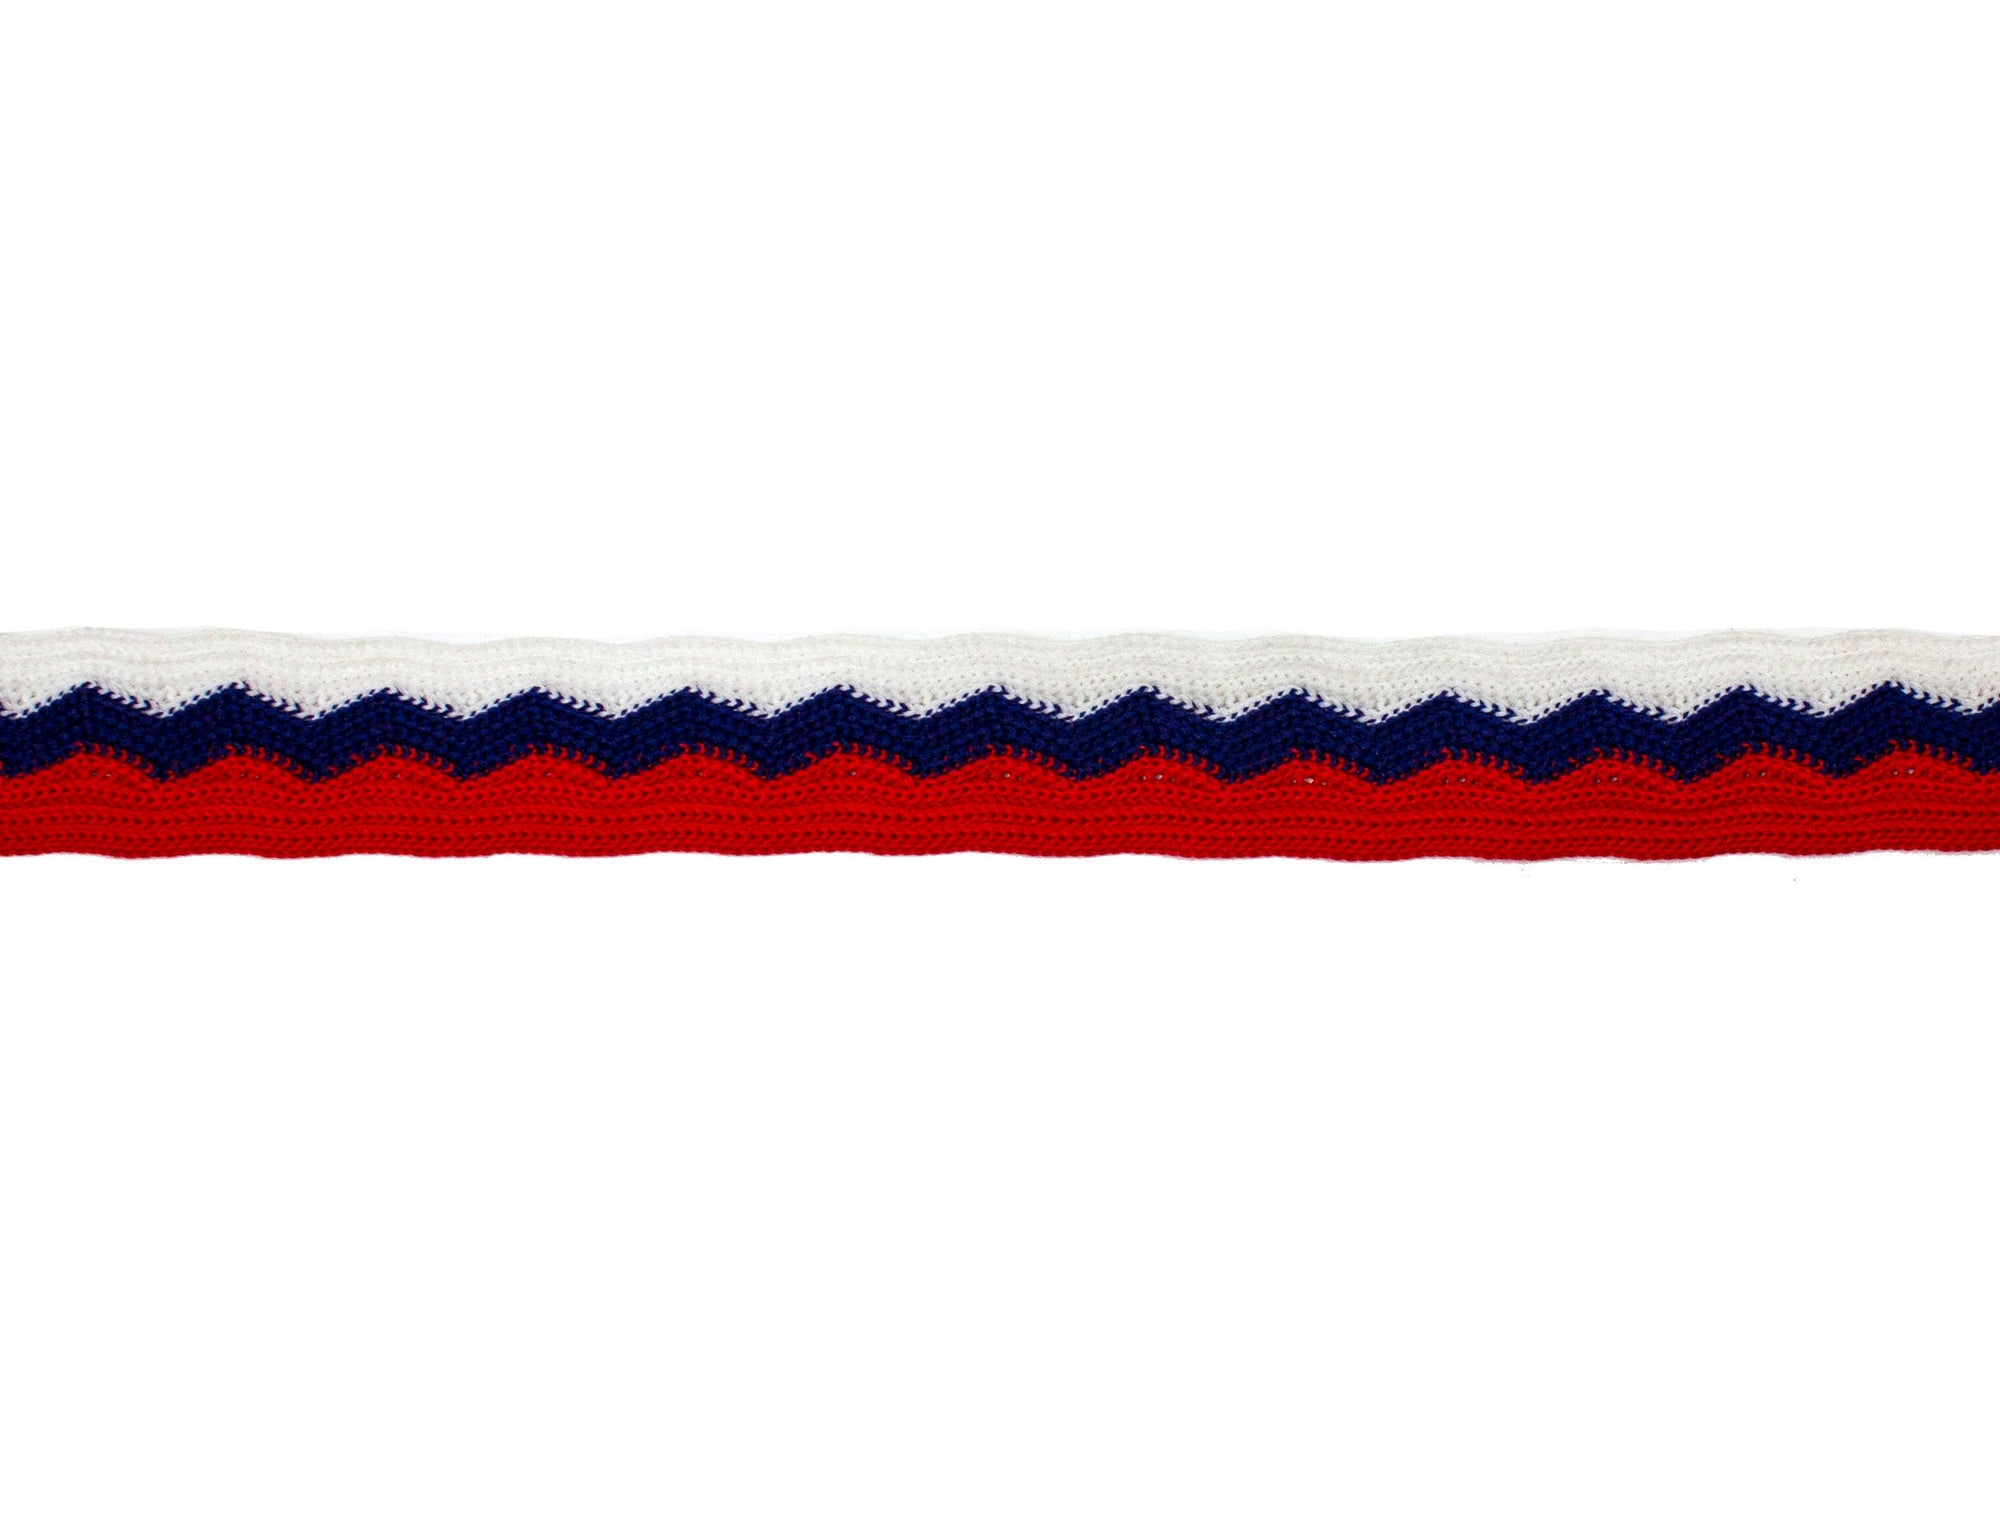 Vintage Elastic Trim Red, White and Blue Zig Zag 1" Wide - Sold by the Yard